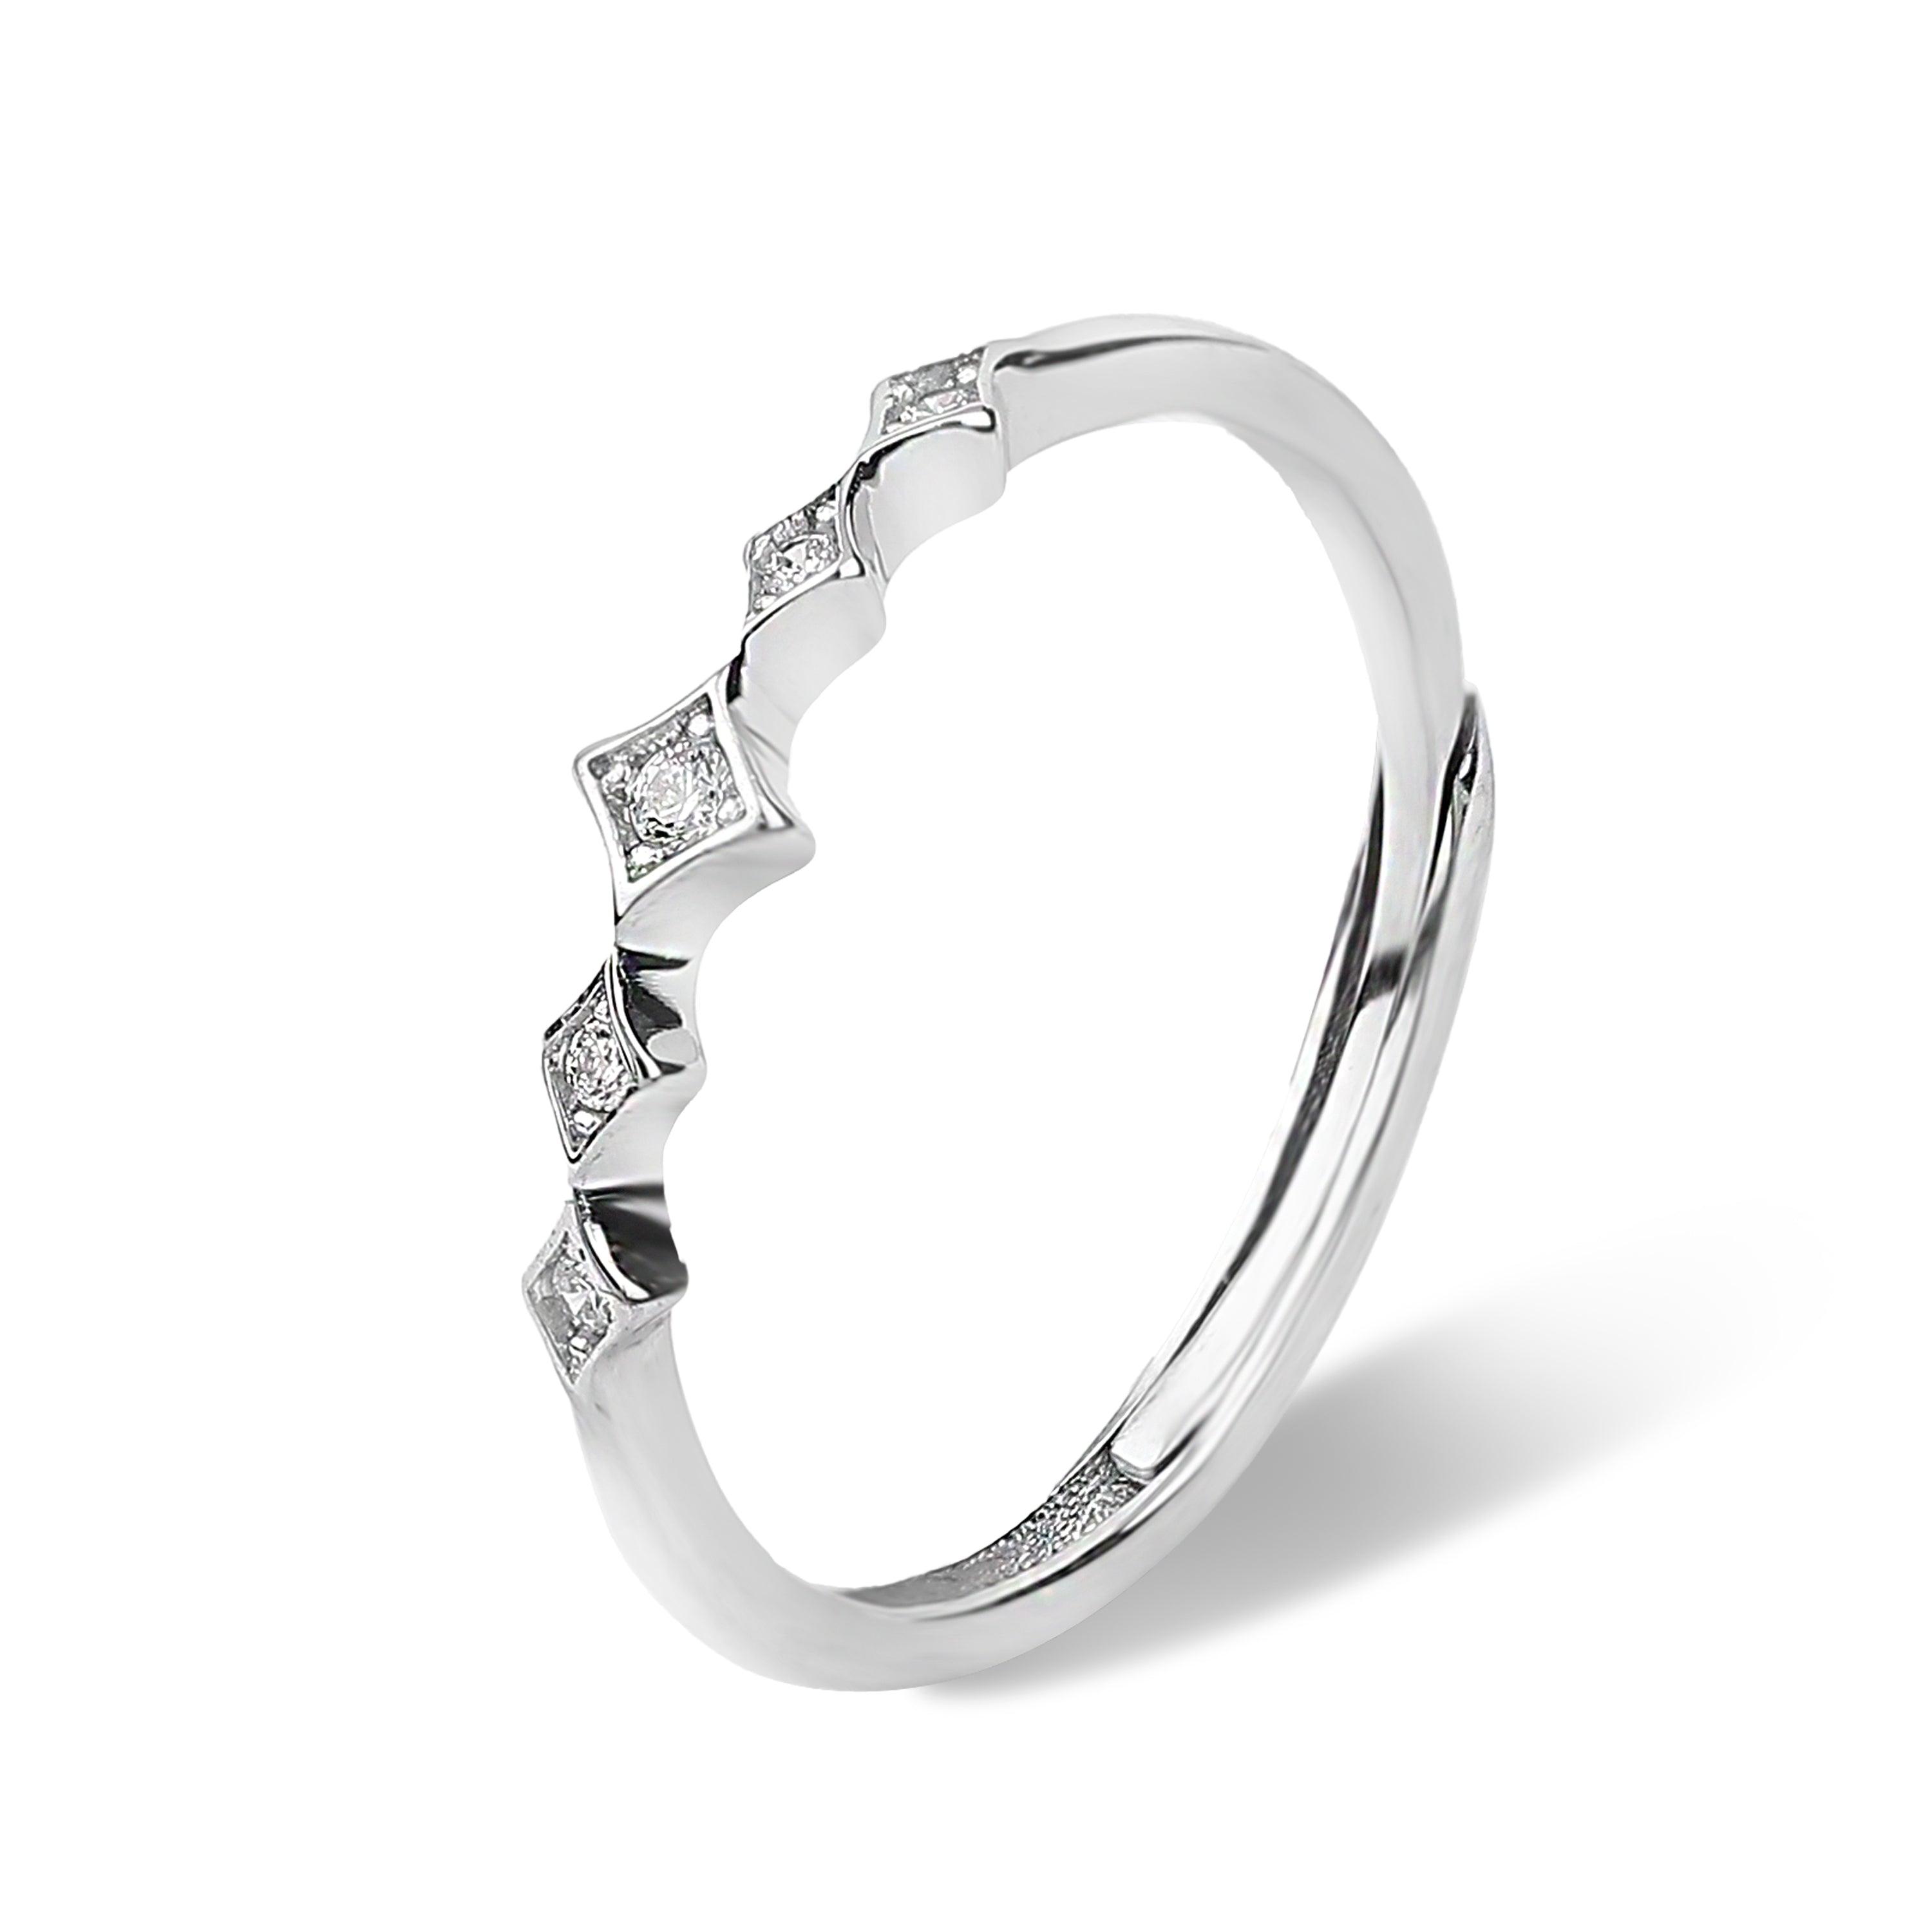 Five star silver diamond ring with adjustable size